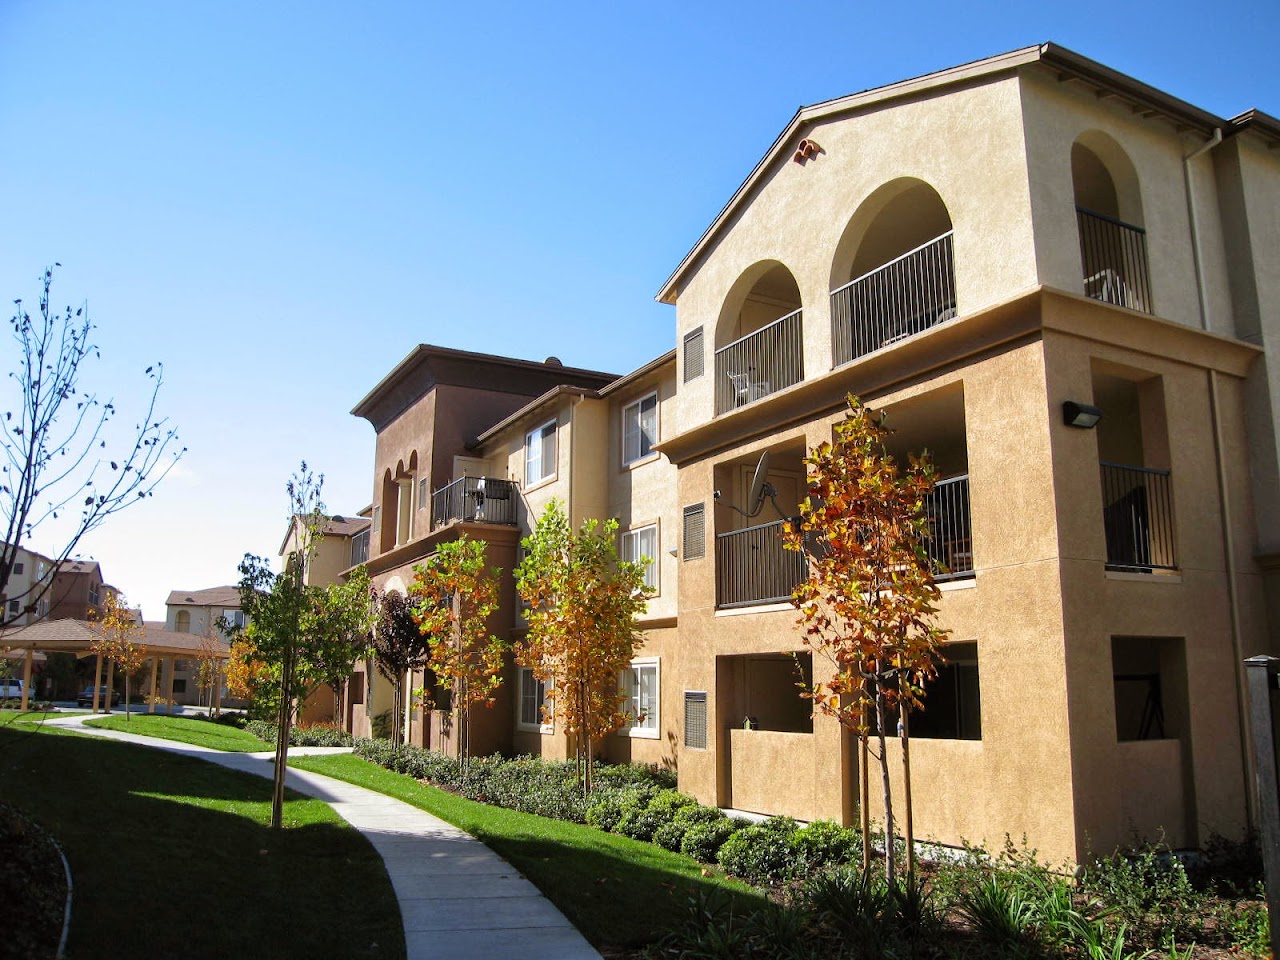 Photo of MUIRLANDS AT WINDEMERE APTS. Affordable housing located at 1108 CRESTFIELD DR SAN RAMON, CA 94582